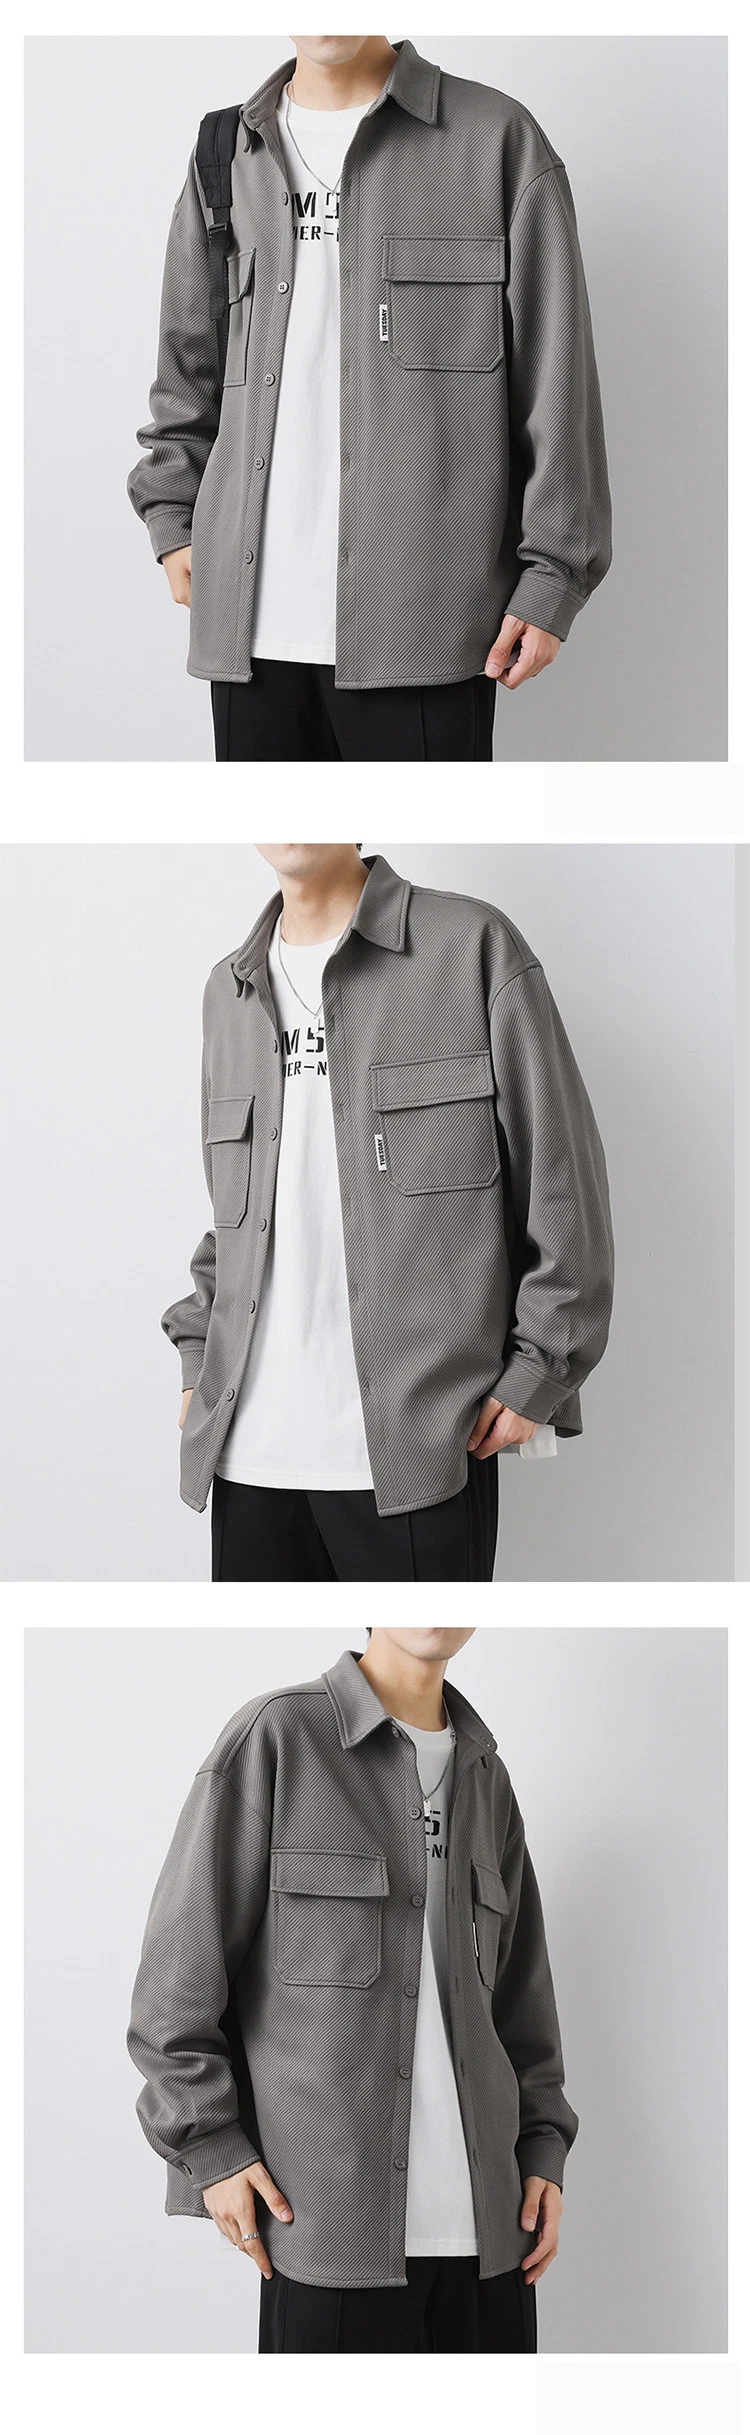 New Spring and Autumn Male′ S Worksuit Multi-Pocket Trend Ins Student Solid Color Top Casual Jacket/Jackets/Coat/Overcoat/Outerwear/Clothing/Clothes